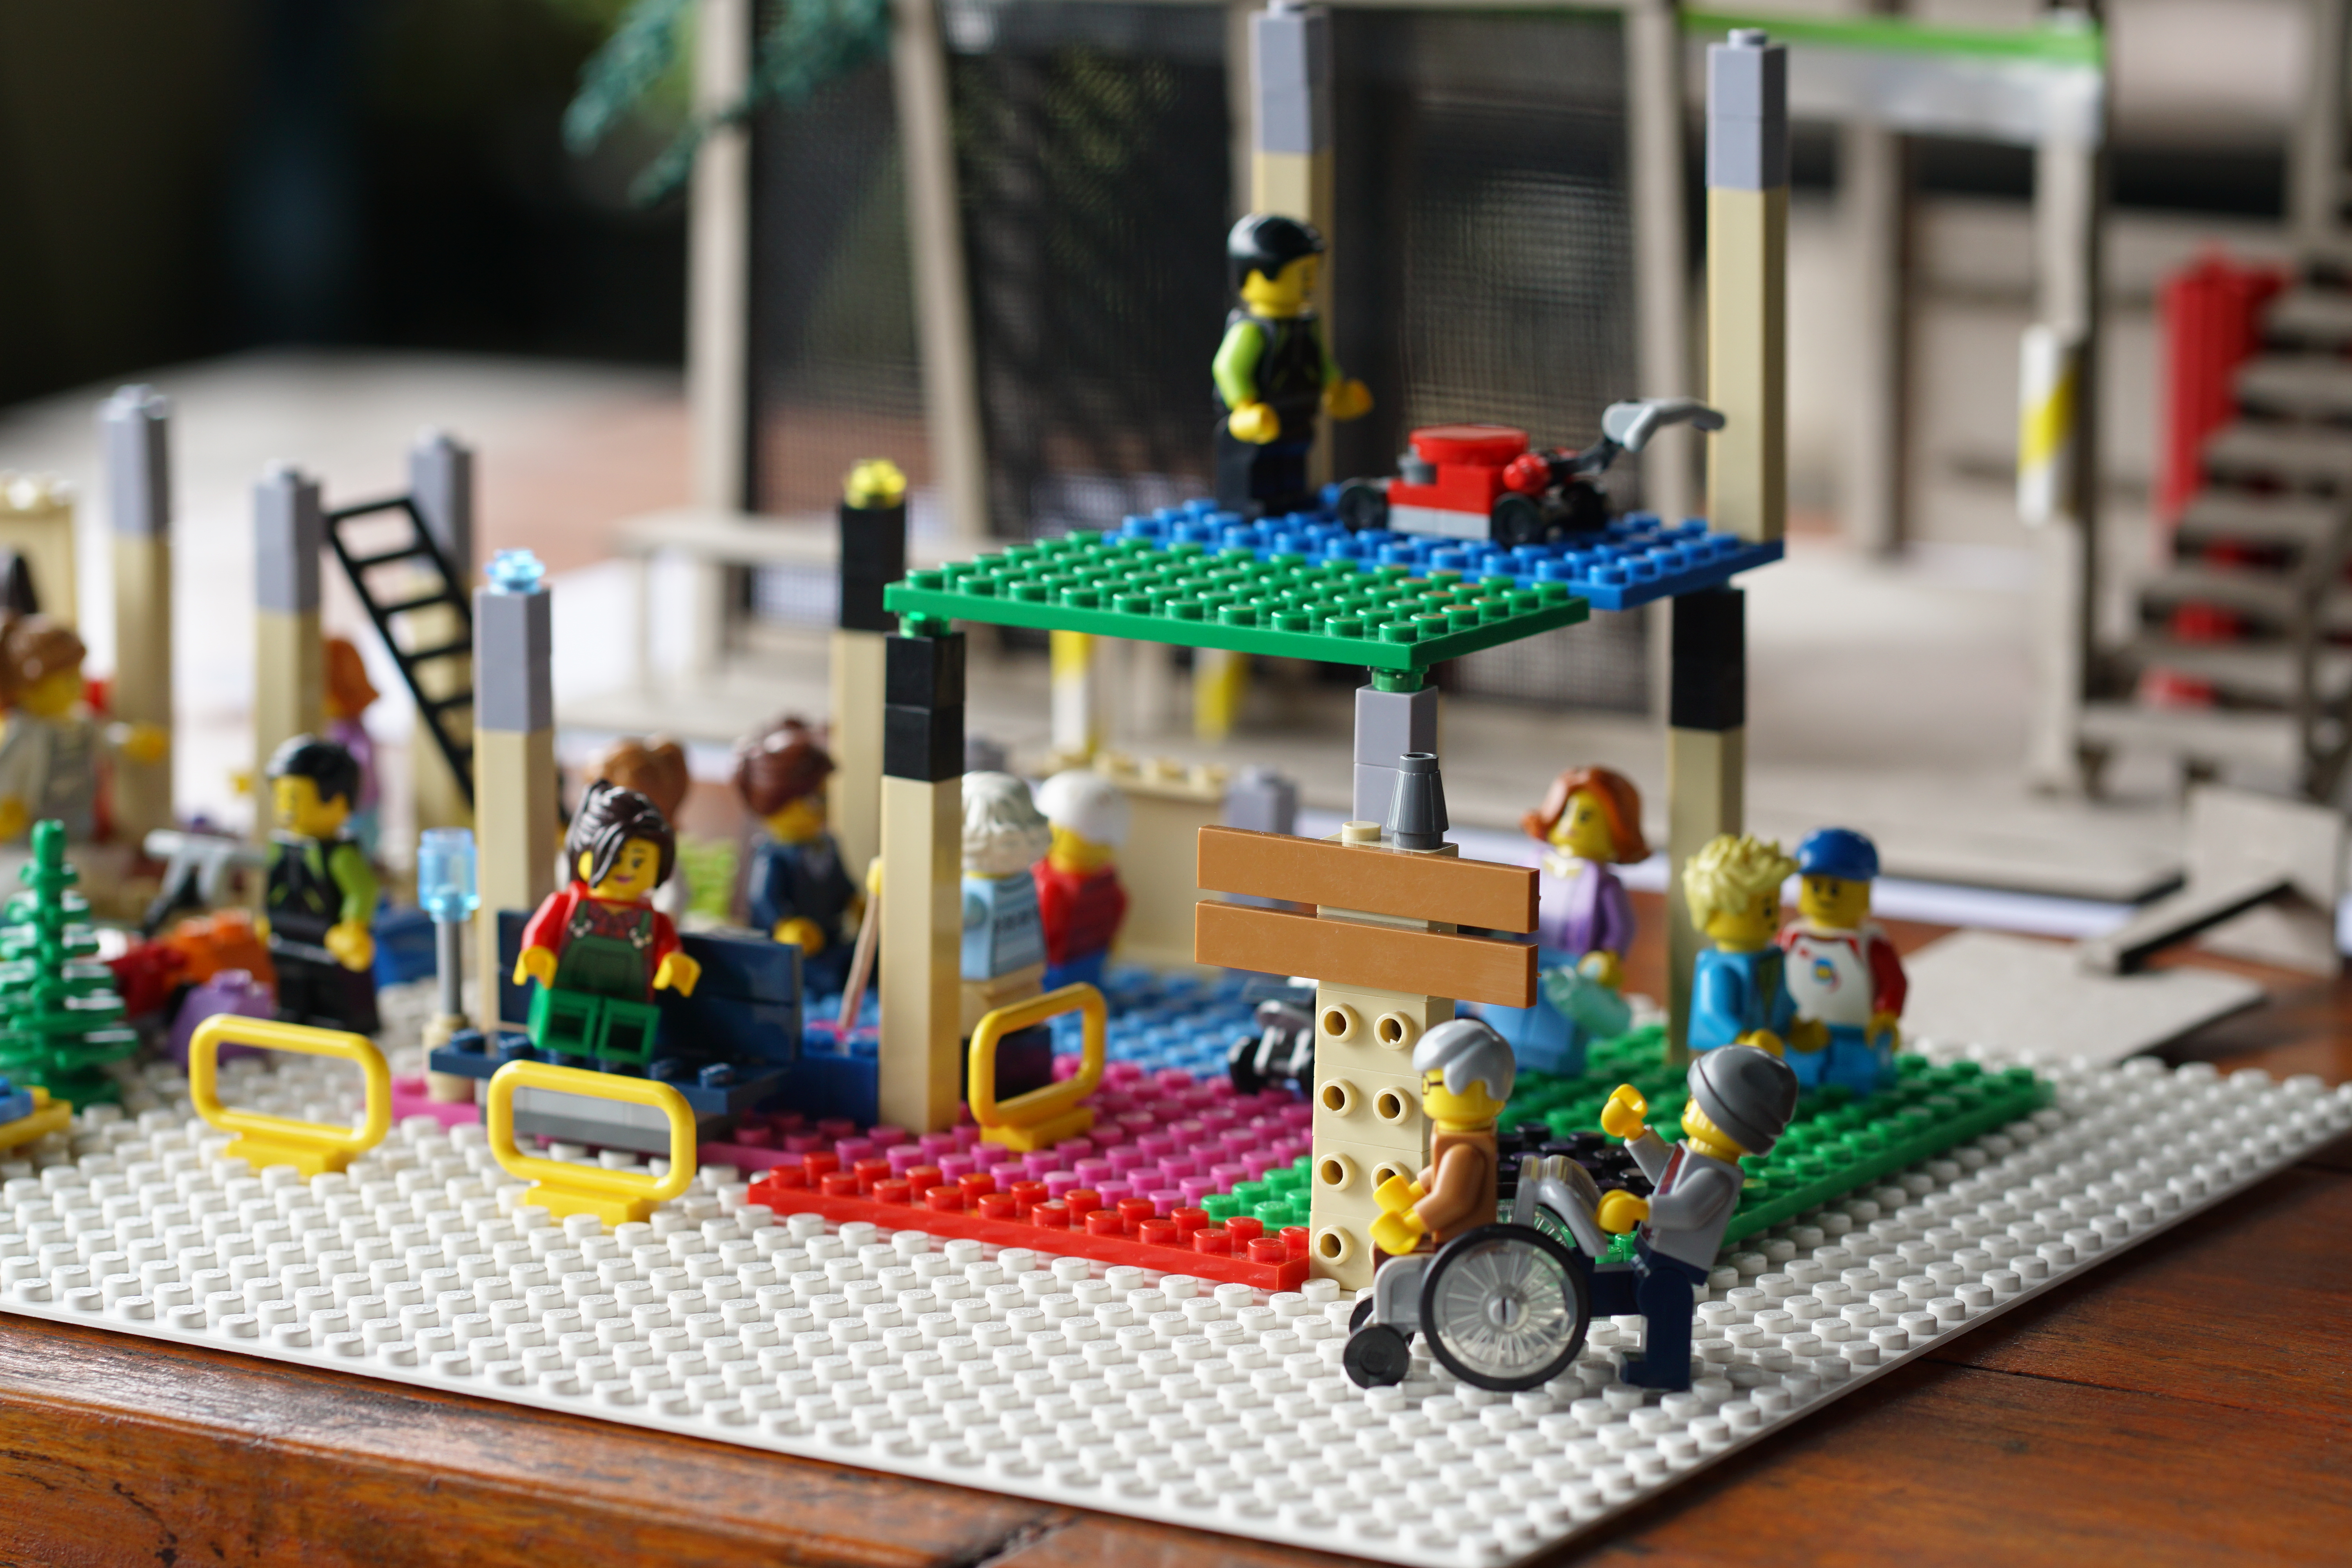 Co-design process. Photograph of a prototype building built by lego with participants of a community co-design workshop Cover Image